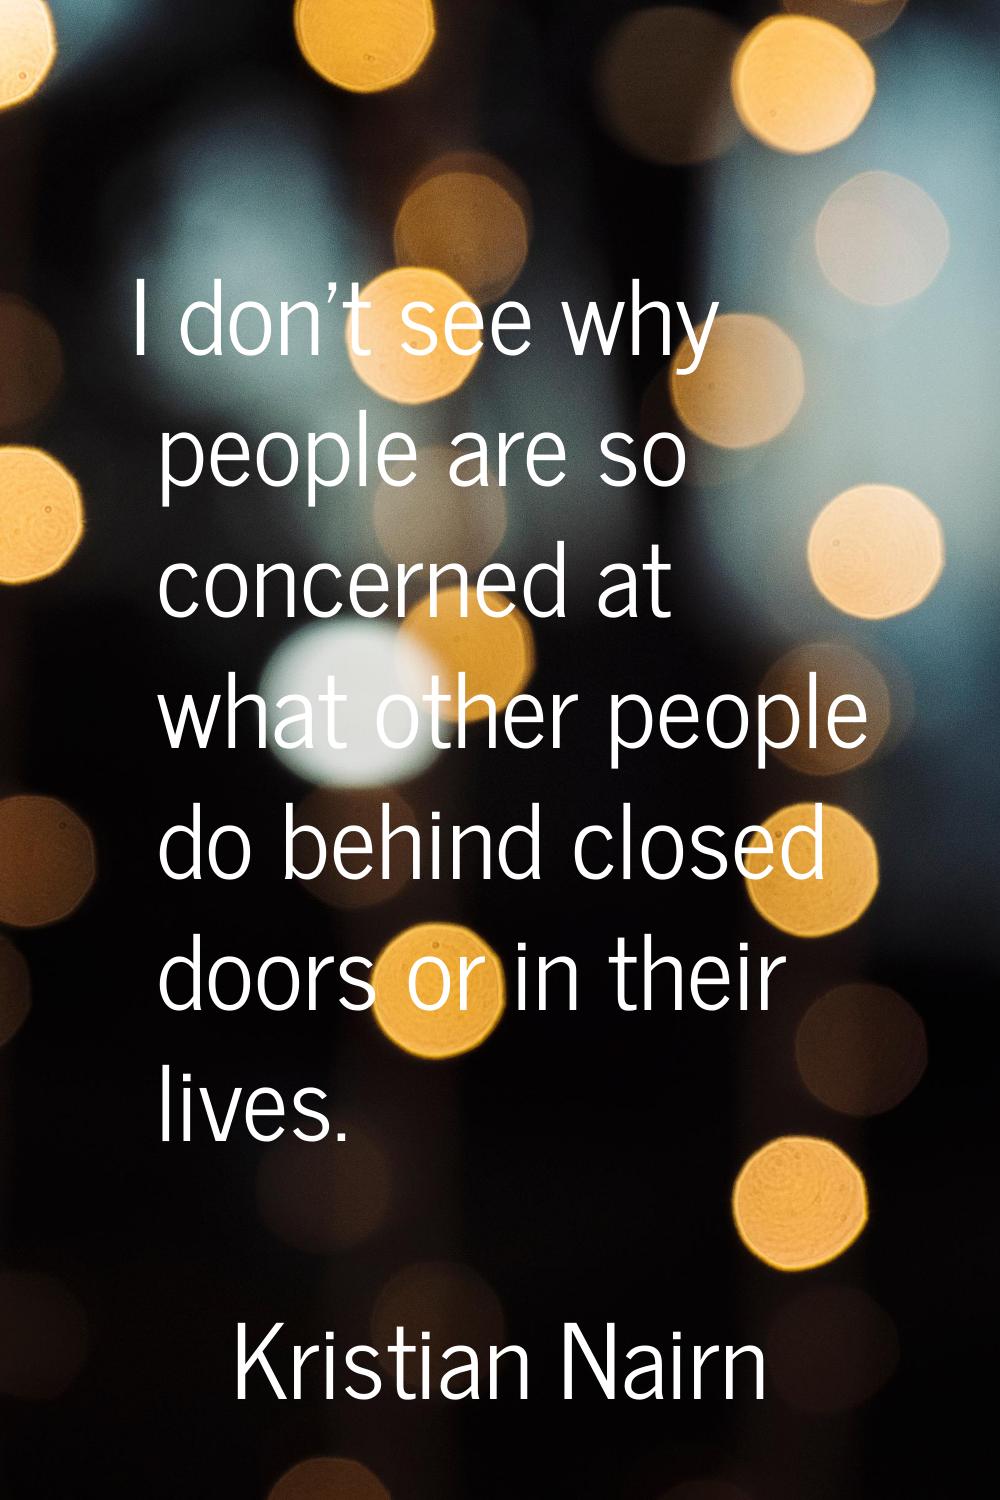 I don't see why people are so concerned at what other people do behind closed doors or in their liv